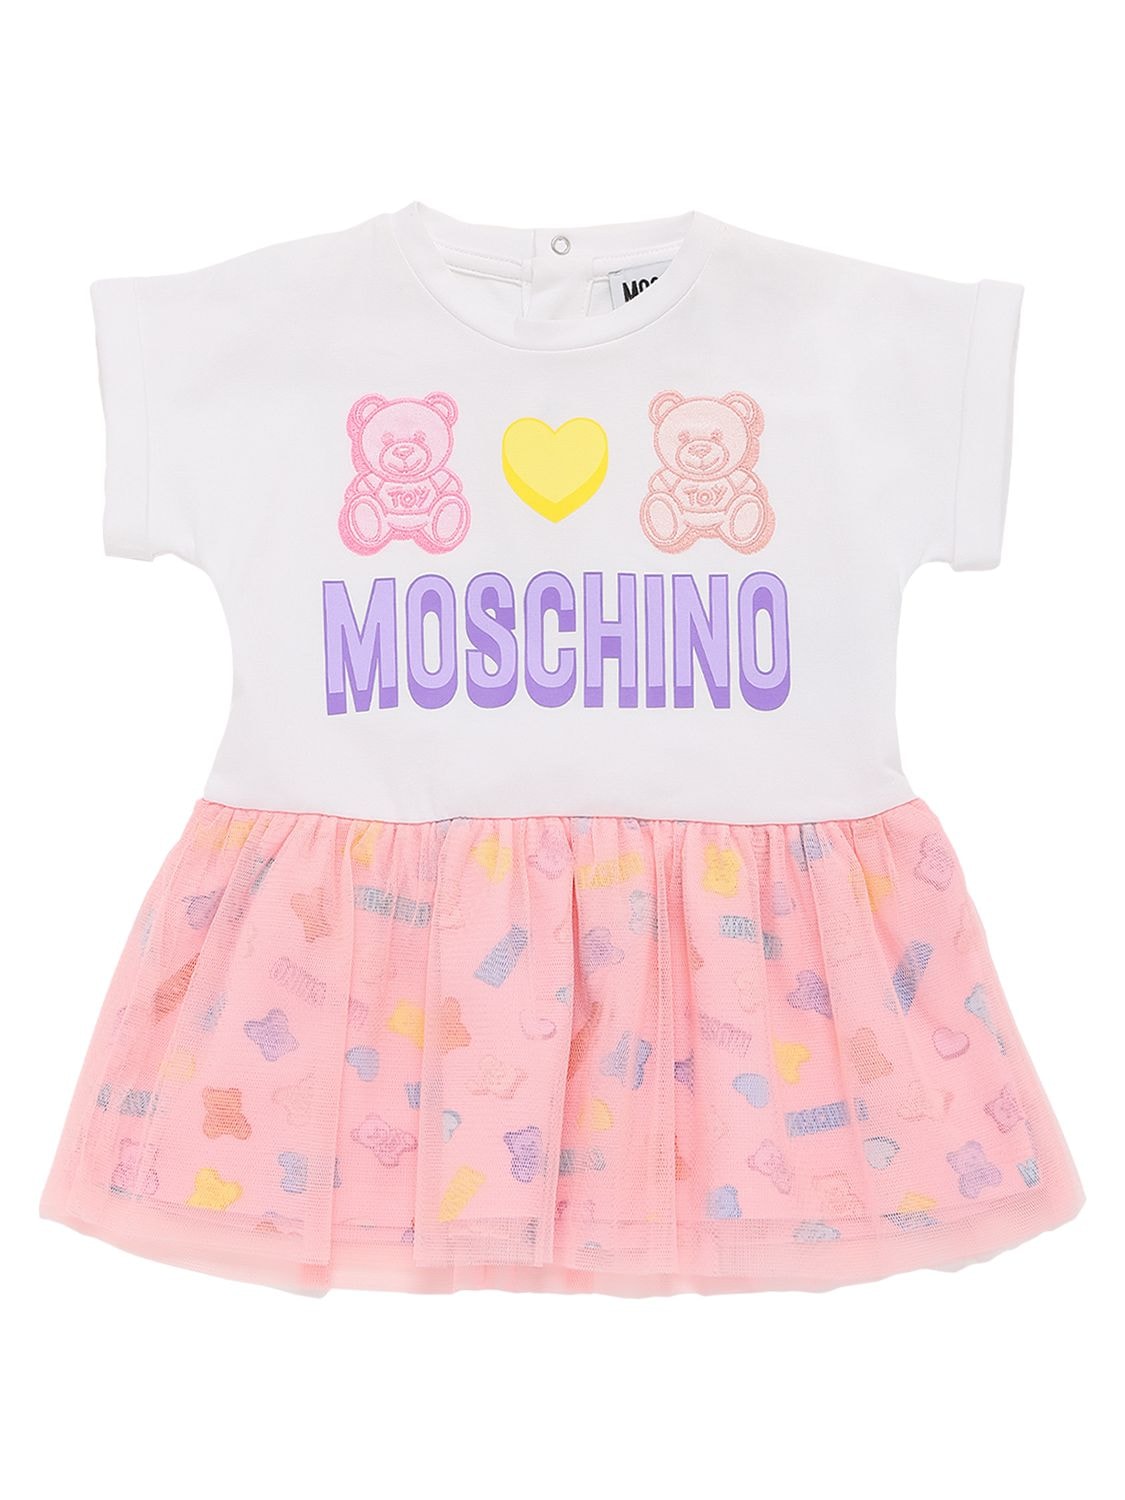 Moschino Kids' Gummy Bears Logo Cotton & Tulle Dress In White,pink